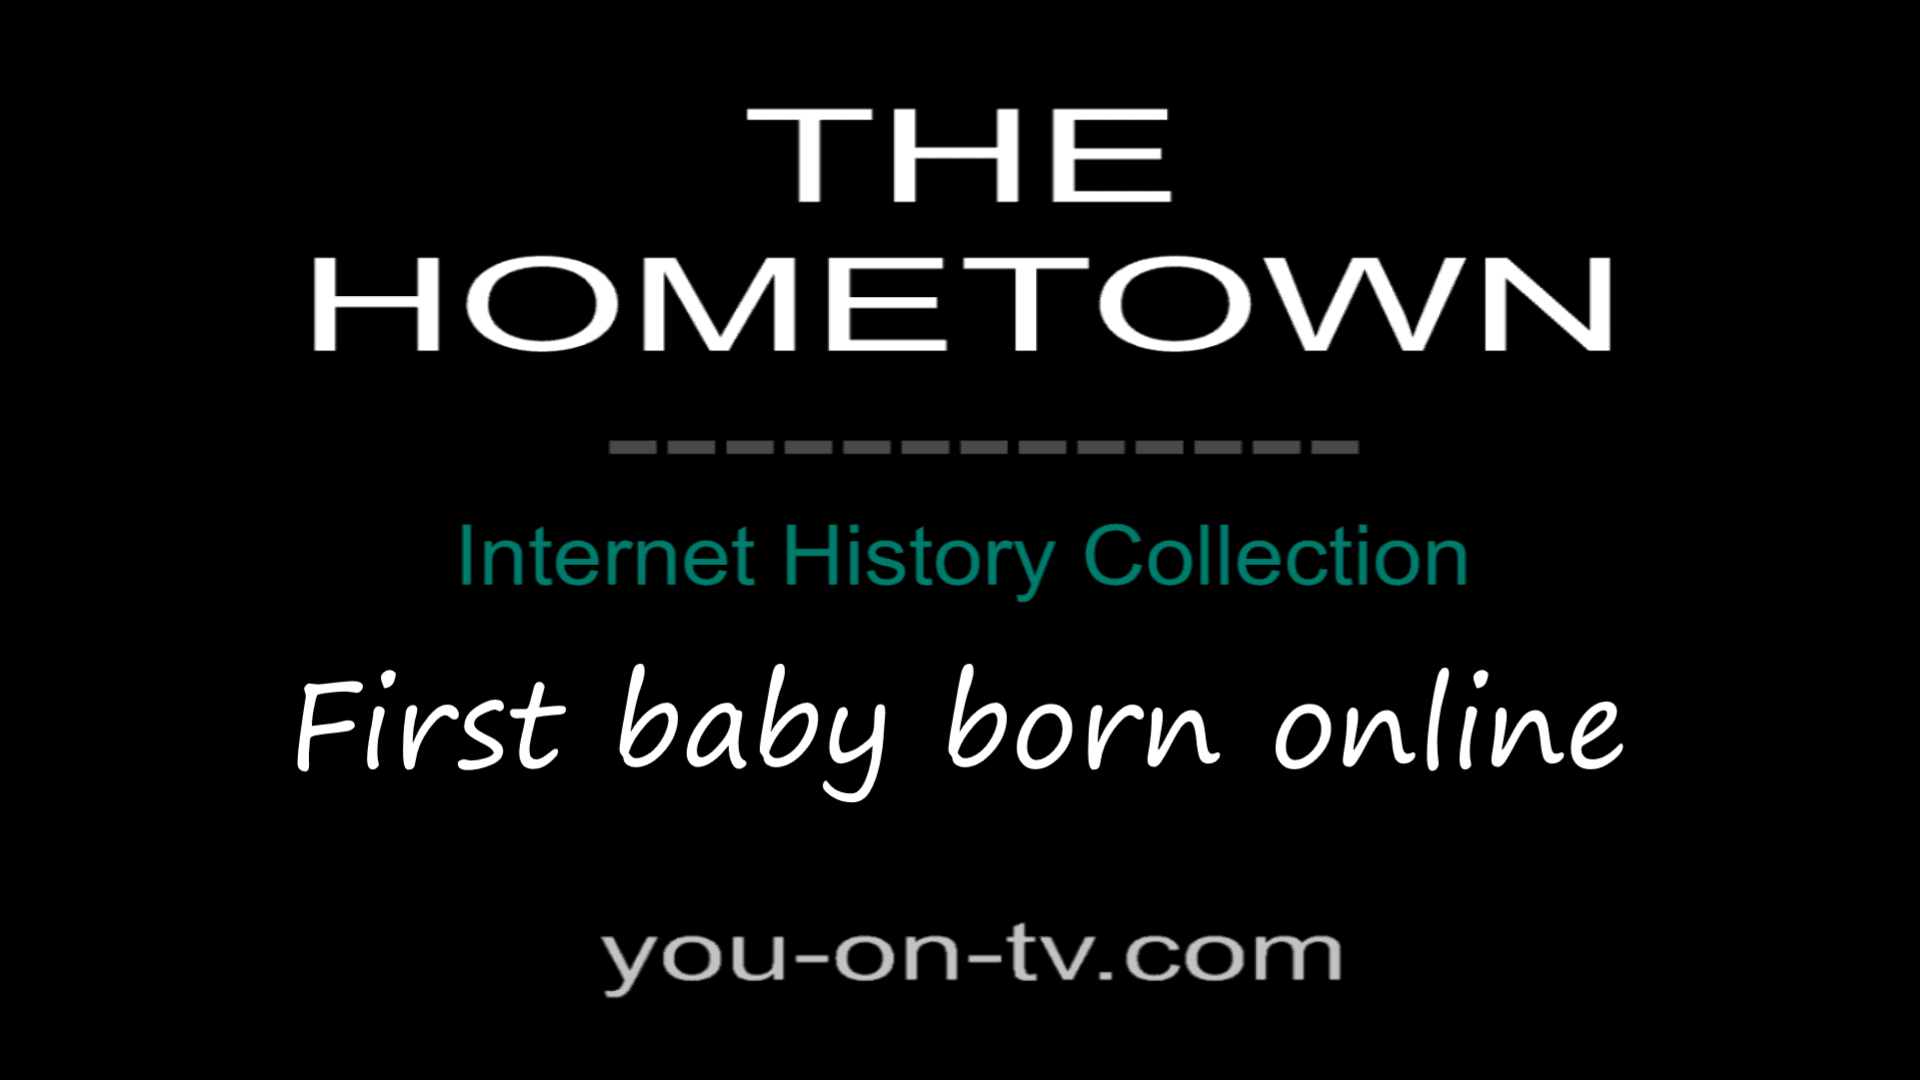 First baby born online title graphic.